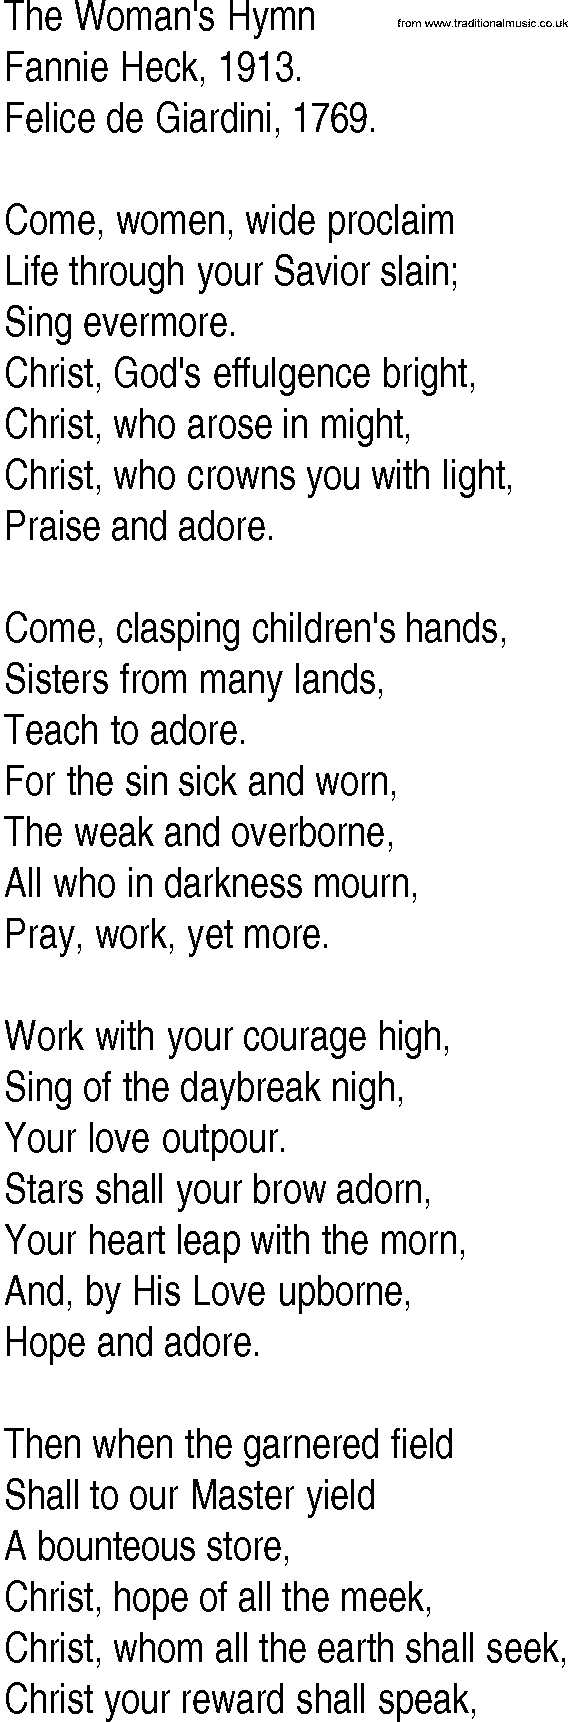 Hymn and Gospel Song: The Woman's Hymn by Fannie Heck lyrics